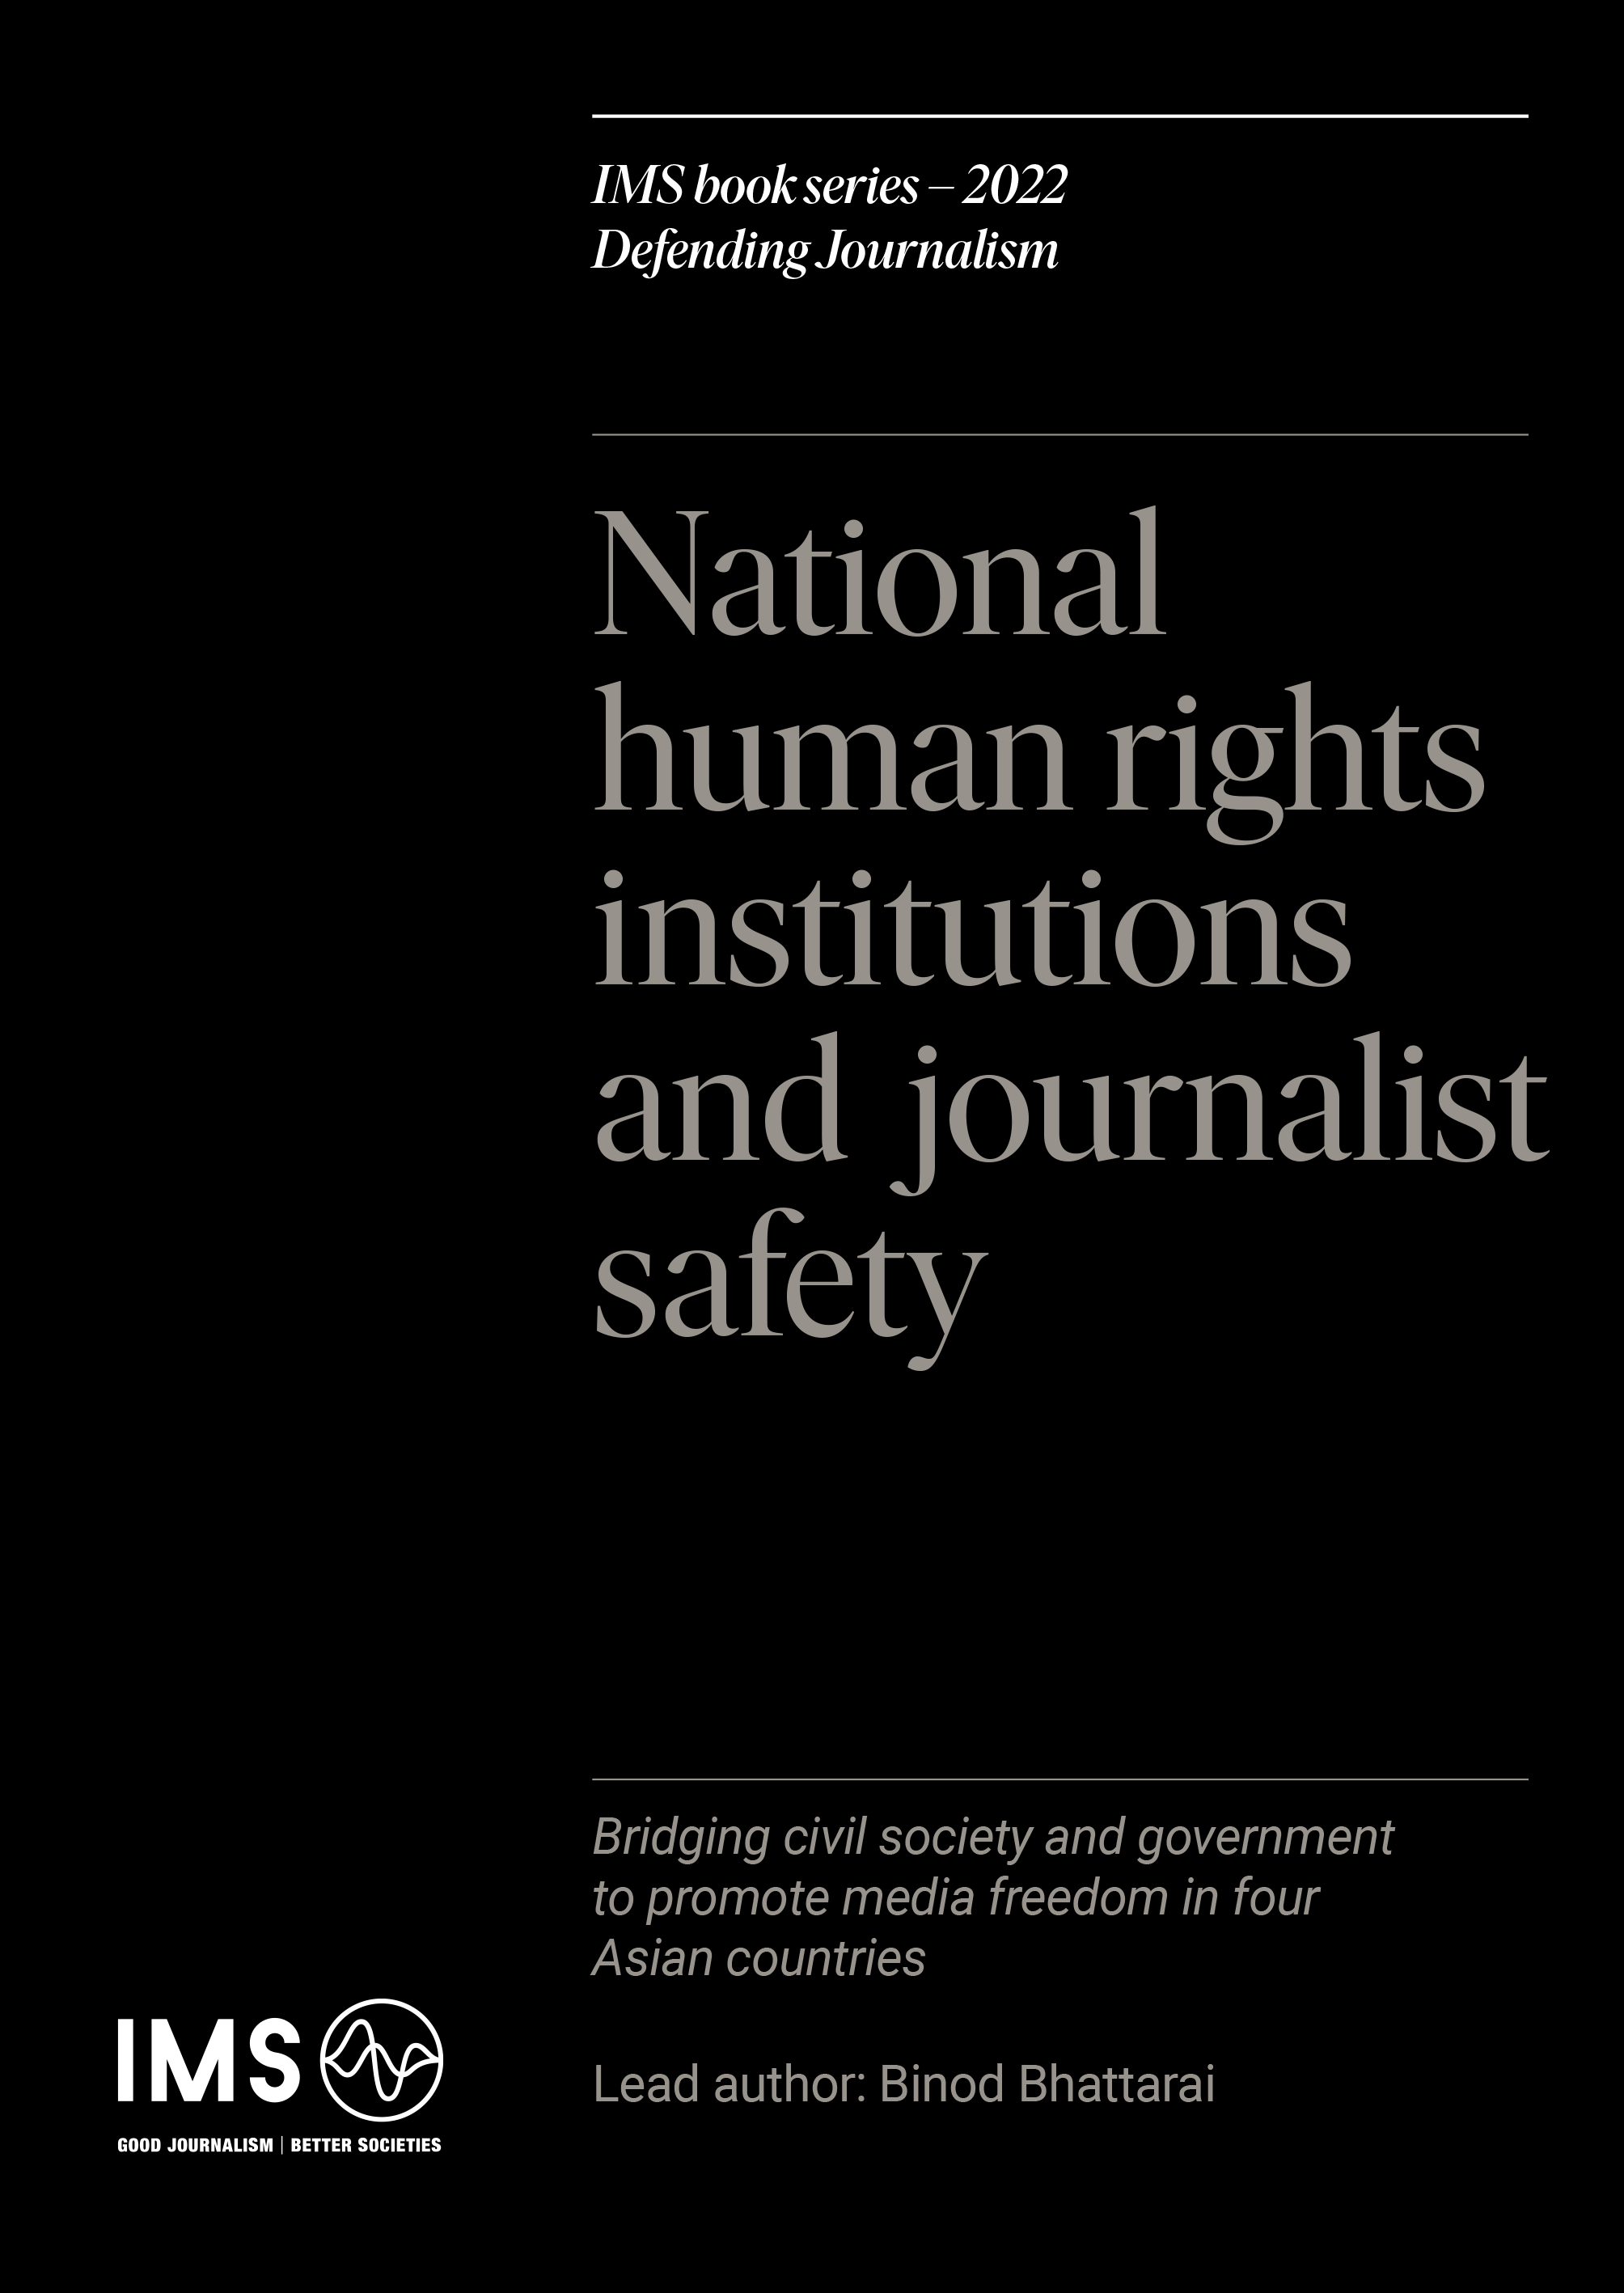 National human rights institutions and journalist safety